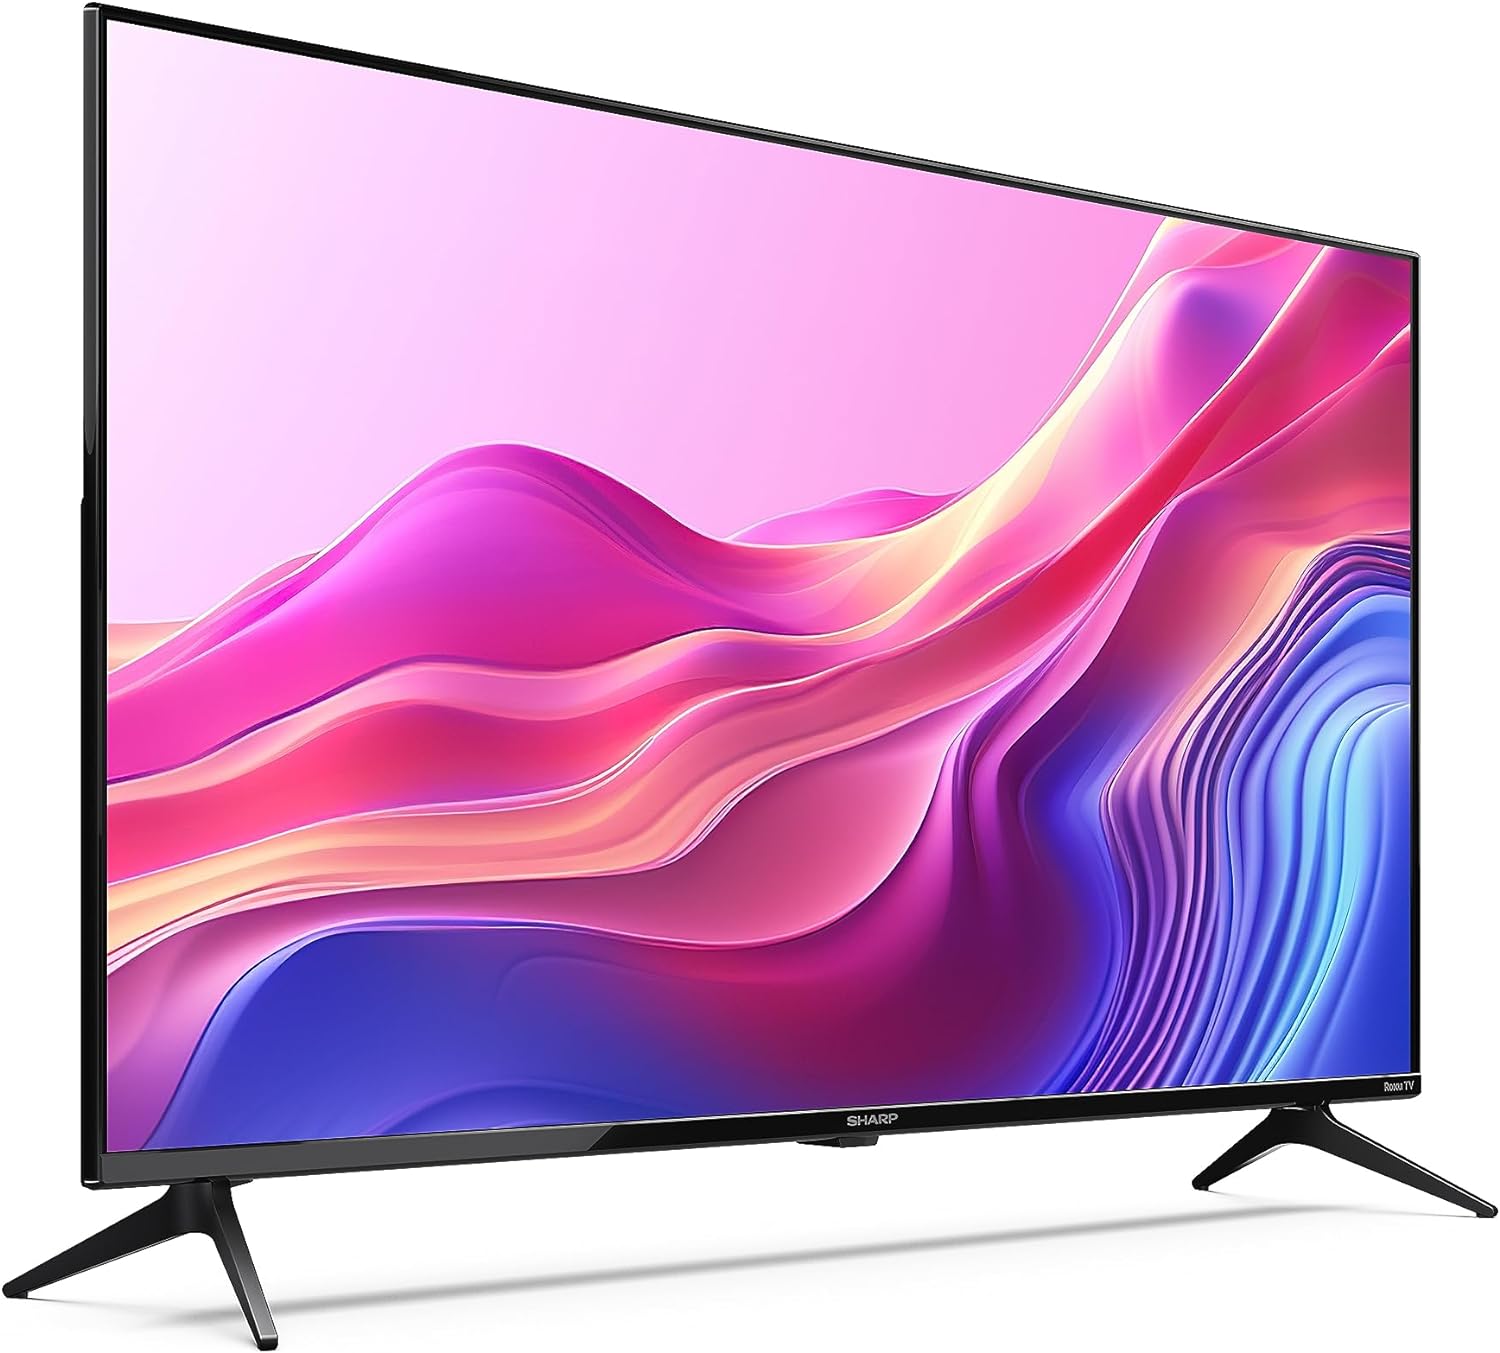 SHARP 40FD6K 40 - Inch Full HD Smart Frameless Roku TV™ in Black with Active Motion 200, HDR10 Support, Freeview Play, Pre - Installed Apps, 3x HDMI & 1x USB - Amazing Gadgets Outlet